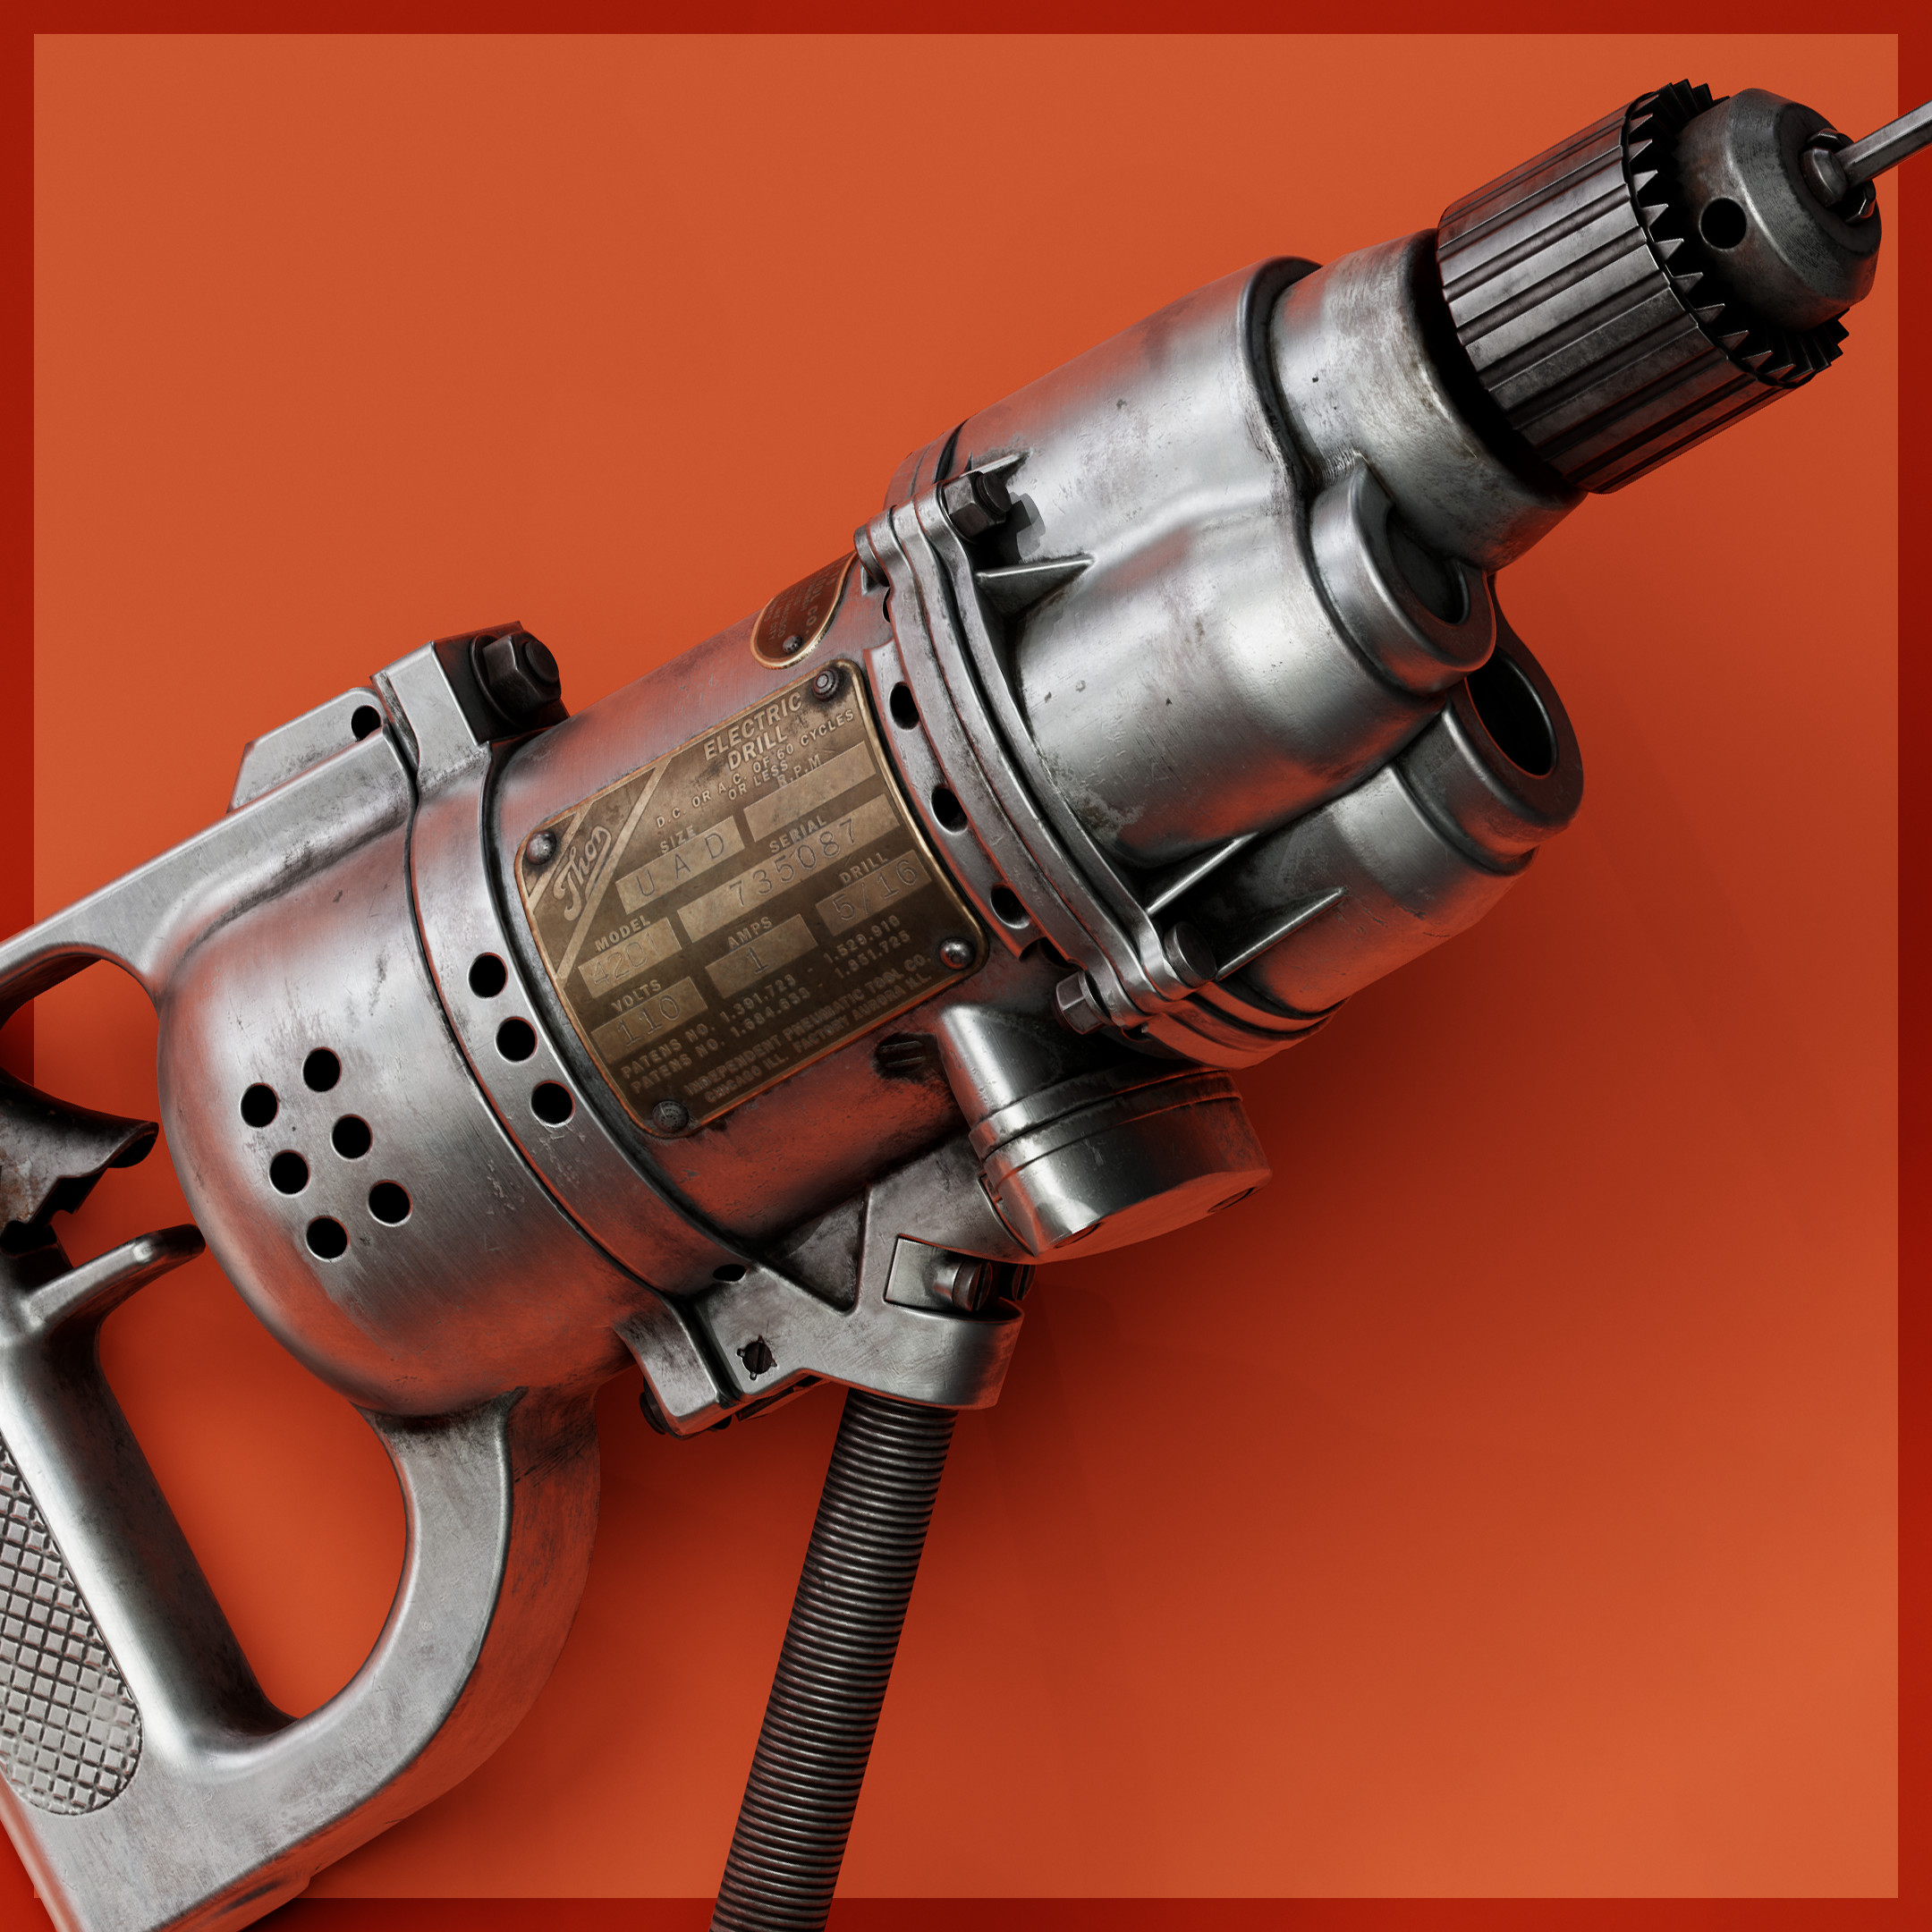 ArtStation - Old electric drill